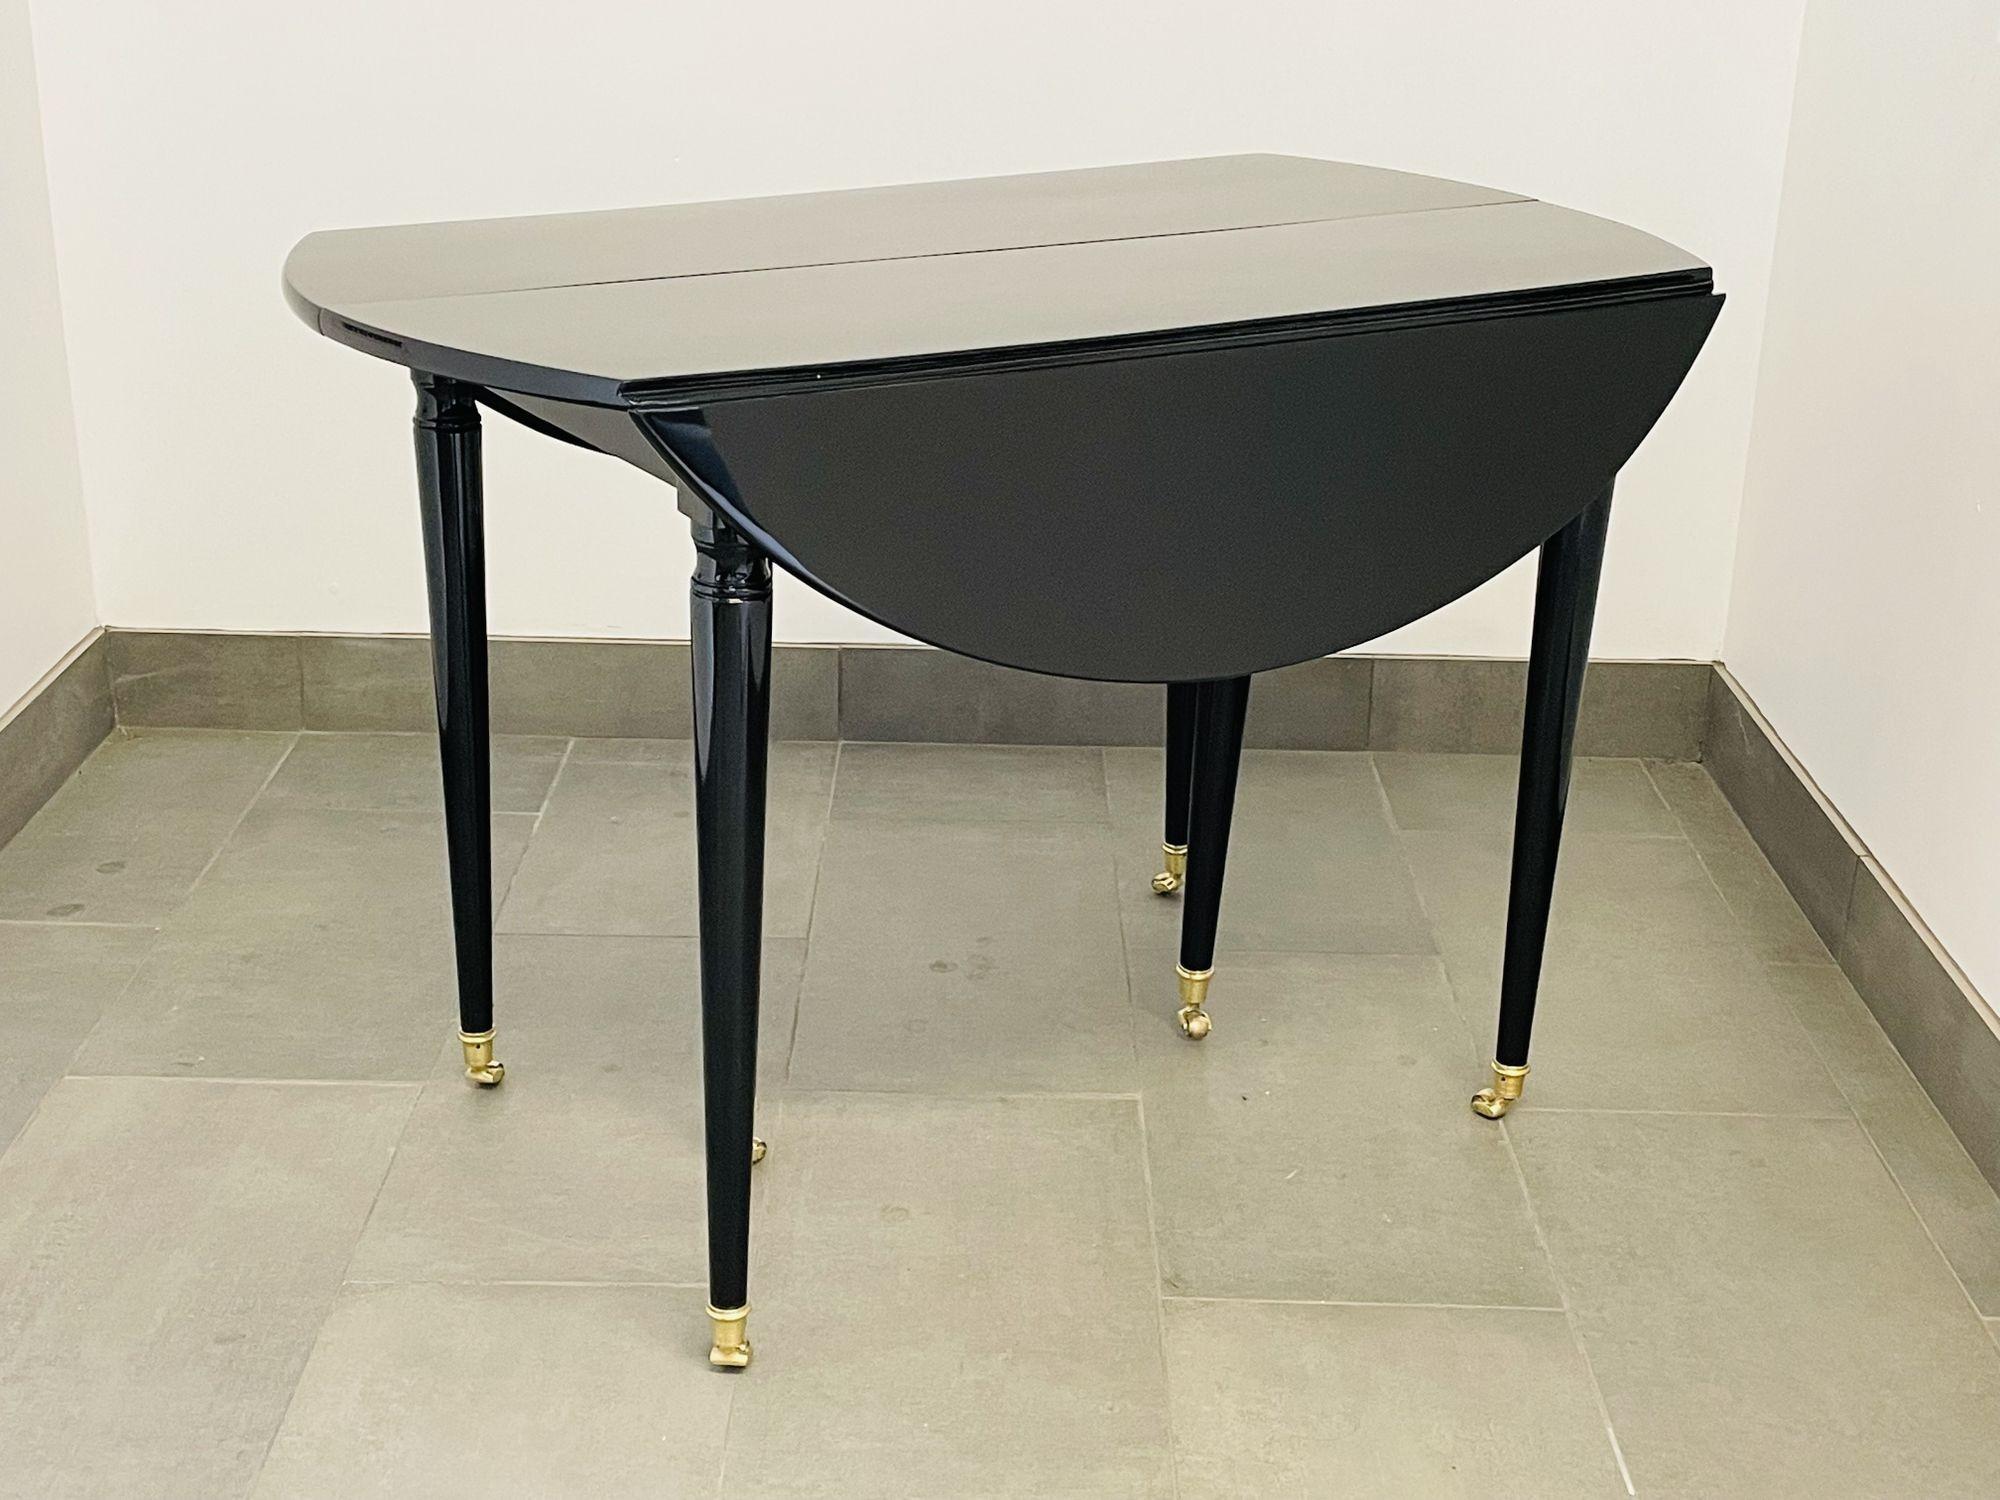 A Hollywood Regency Center, Dining Table. Louis XVI, Maison Jansen. Drop Leaf. Part of our extensive collection of over forty dining tables and chair sets as seen on this site, thus why we are referred to as the King of Dining rooms.
A sleek and